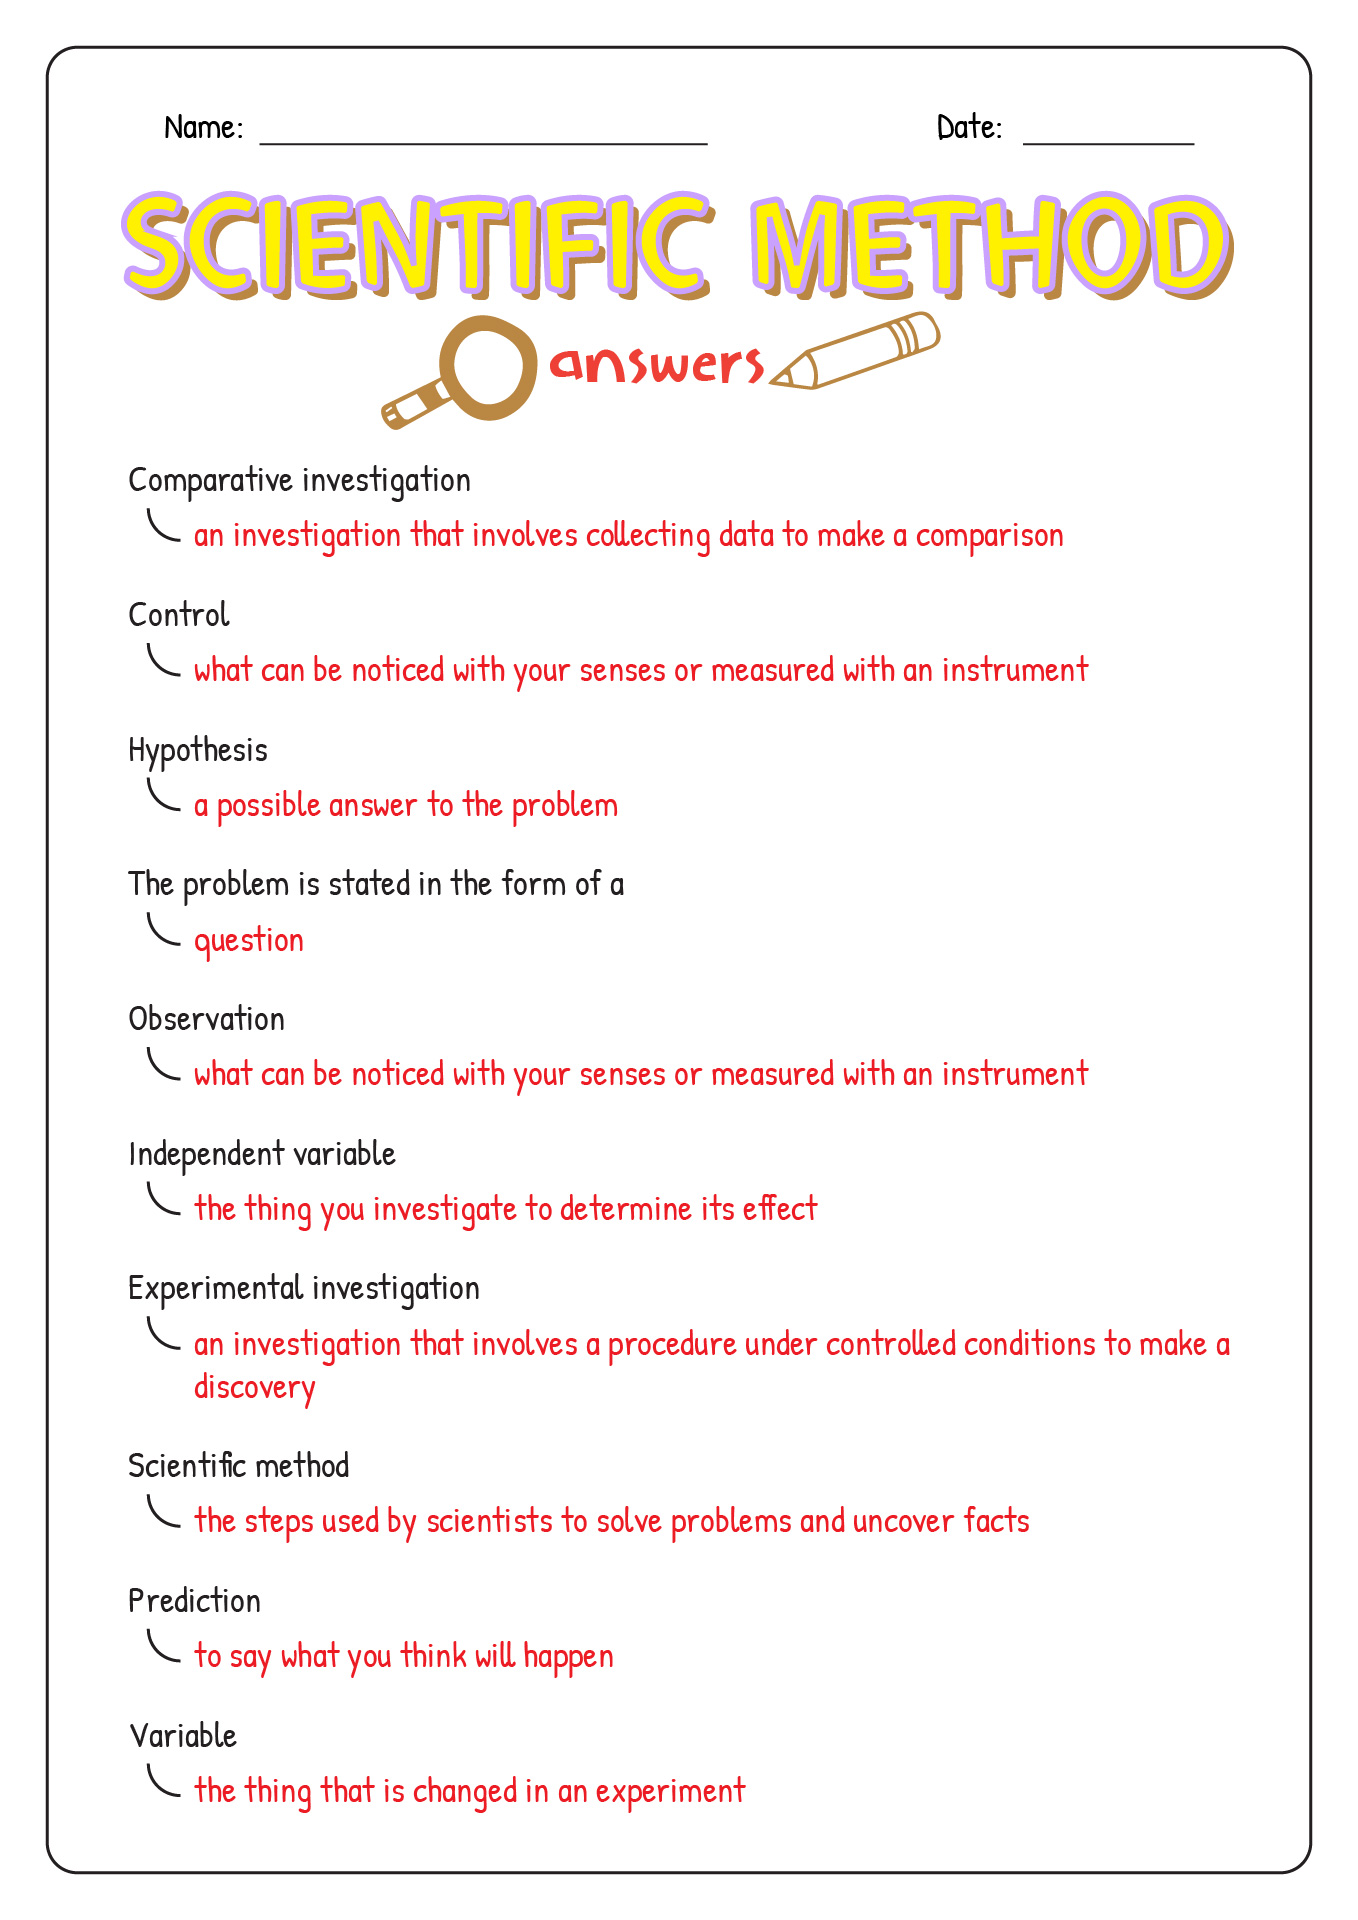 simpsons-variables-worksheet-answer-key-free-download-qstion-co